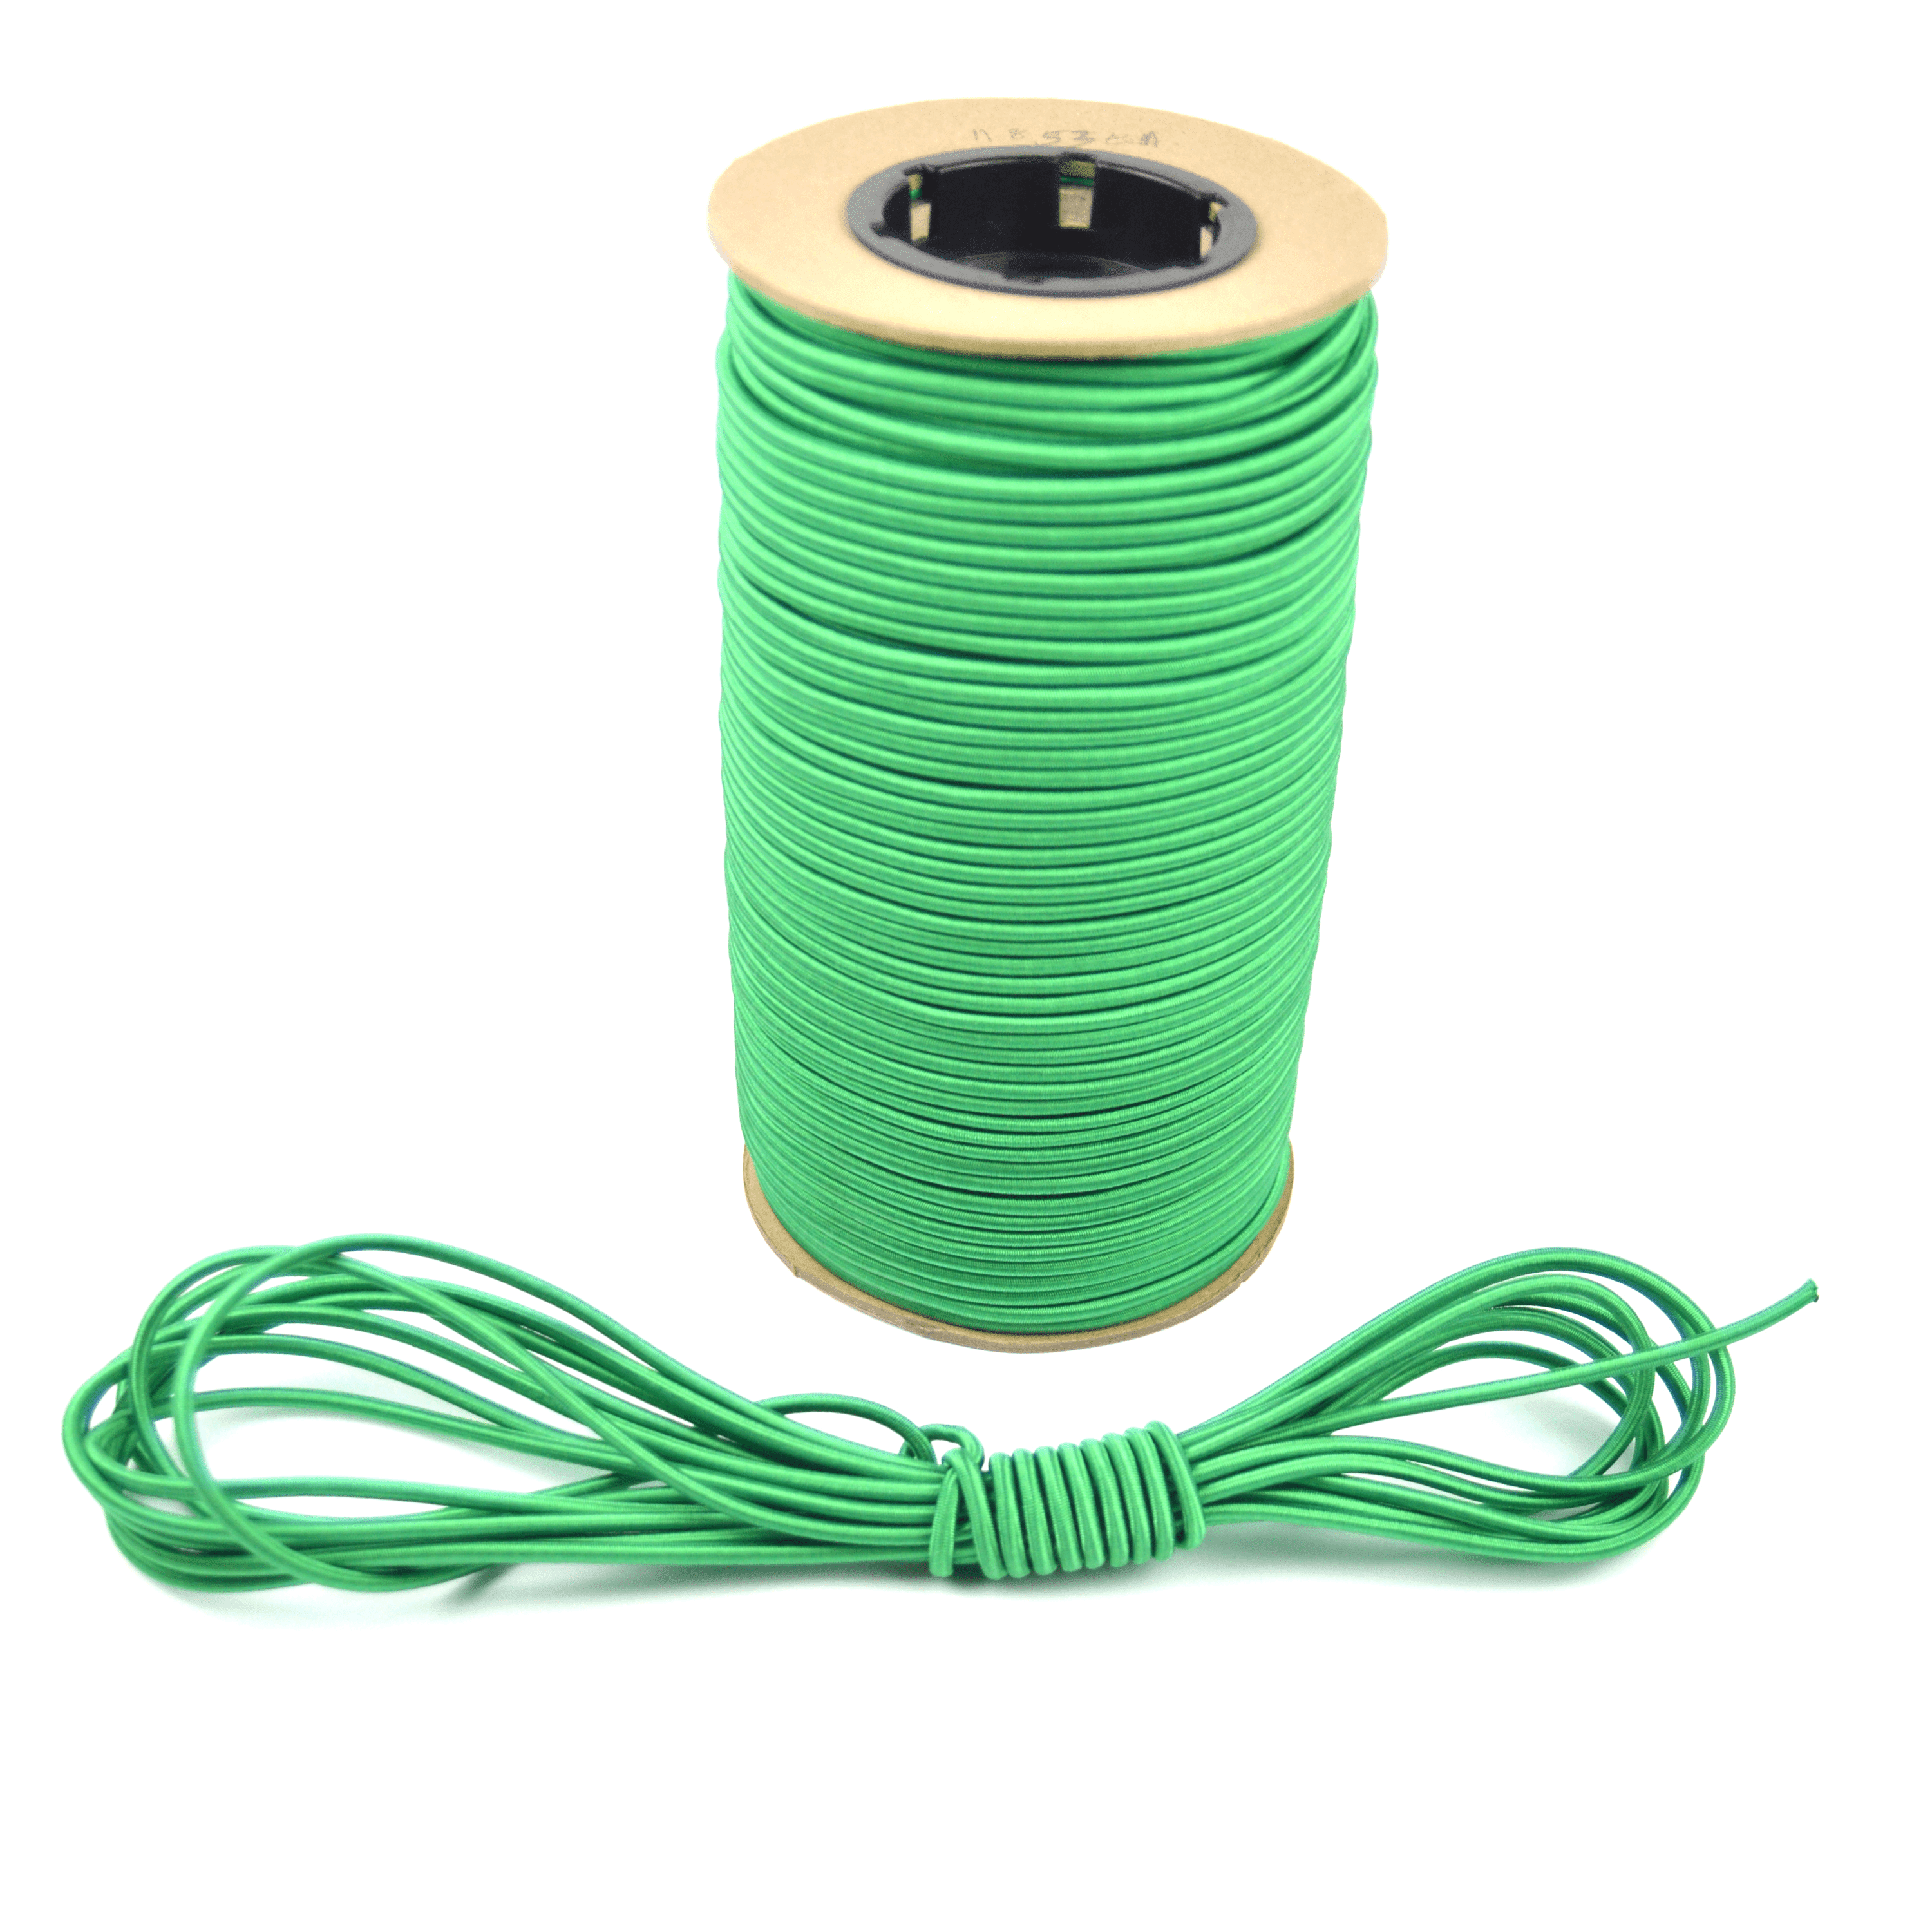 50ft 3/16" Green Bungee Cord Marine Grade Heavy Duty Shock Rope Tie Down Stretch 